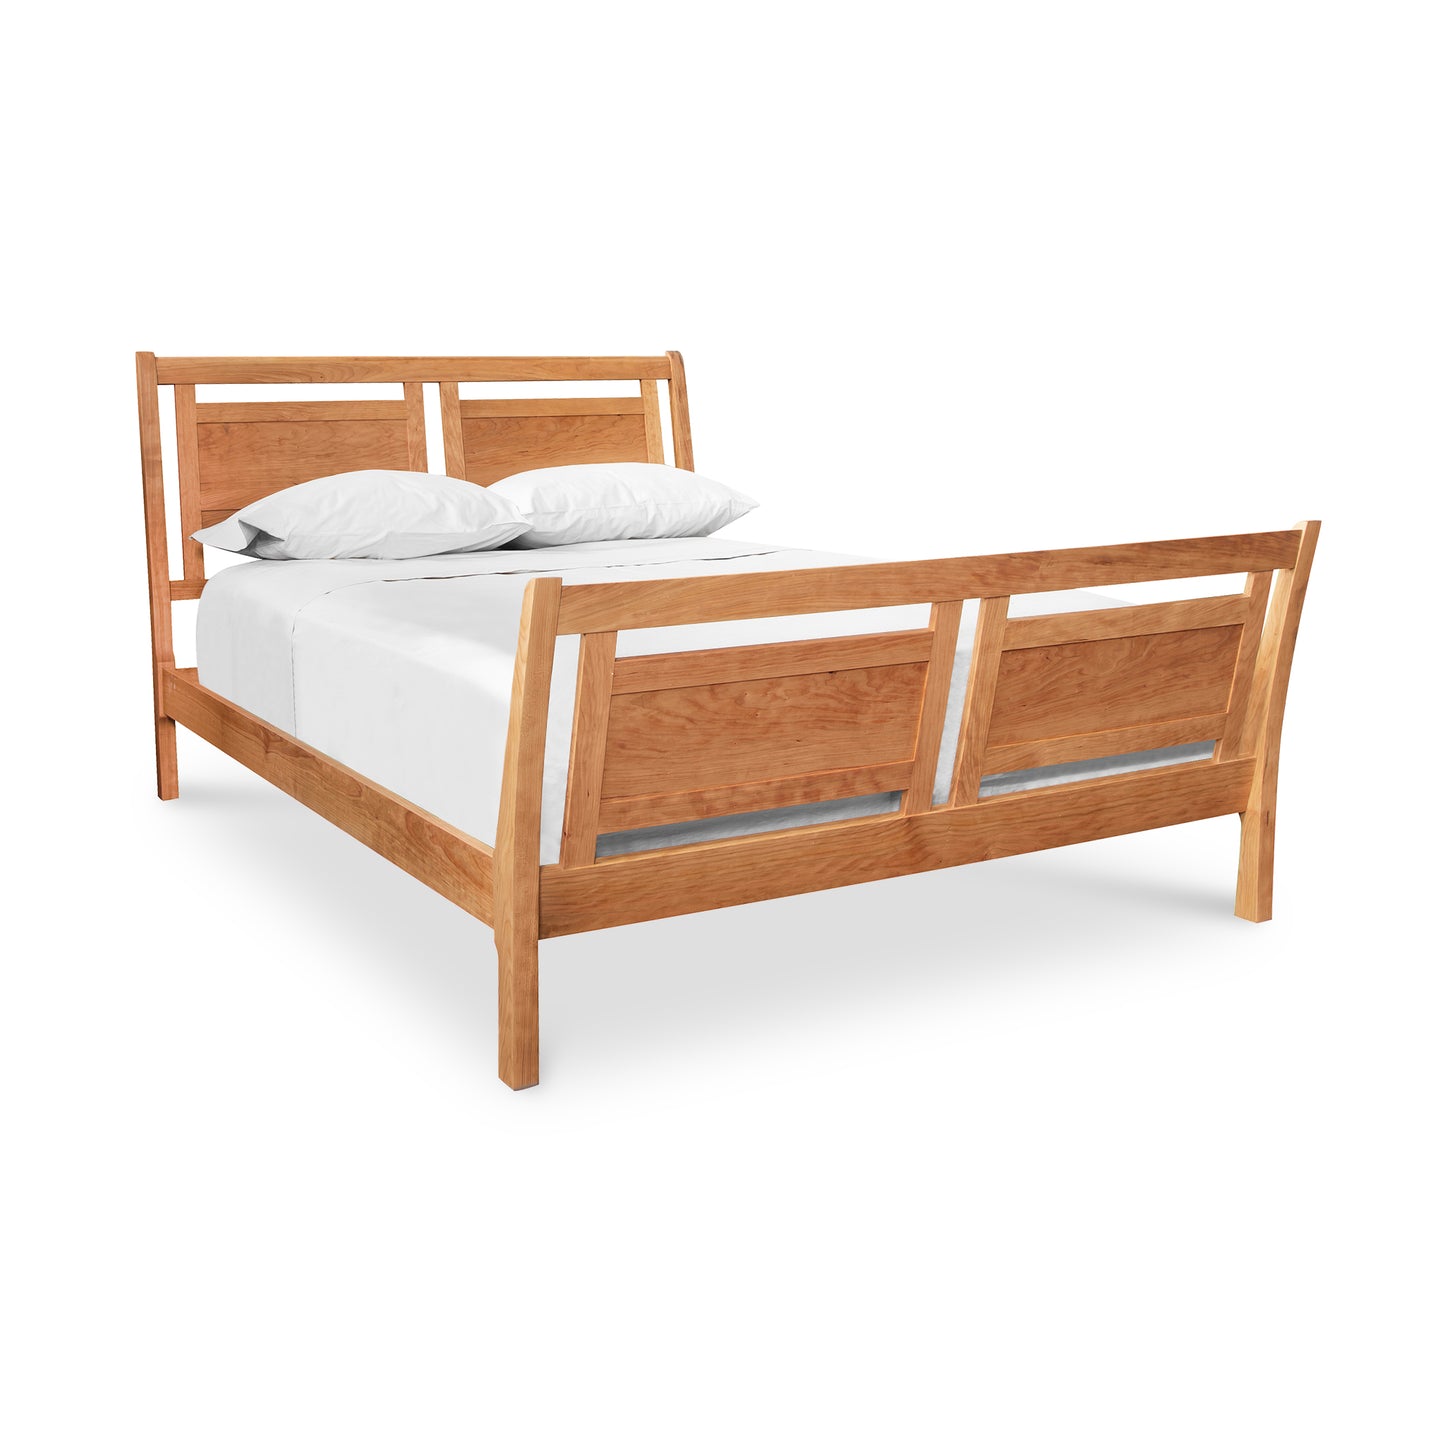 An eco-friendly Incline Sleigh Bed from Vermont Furniture Designs with a white mattress and pillows, isolated on a white background.